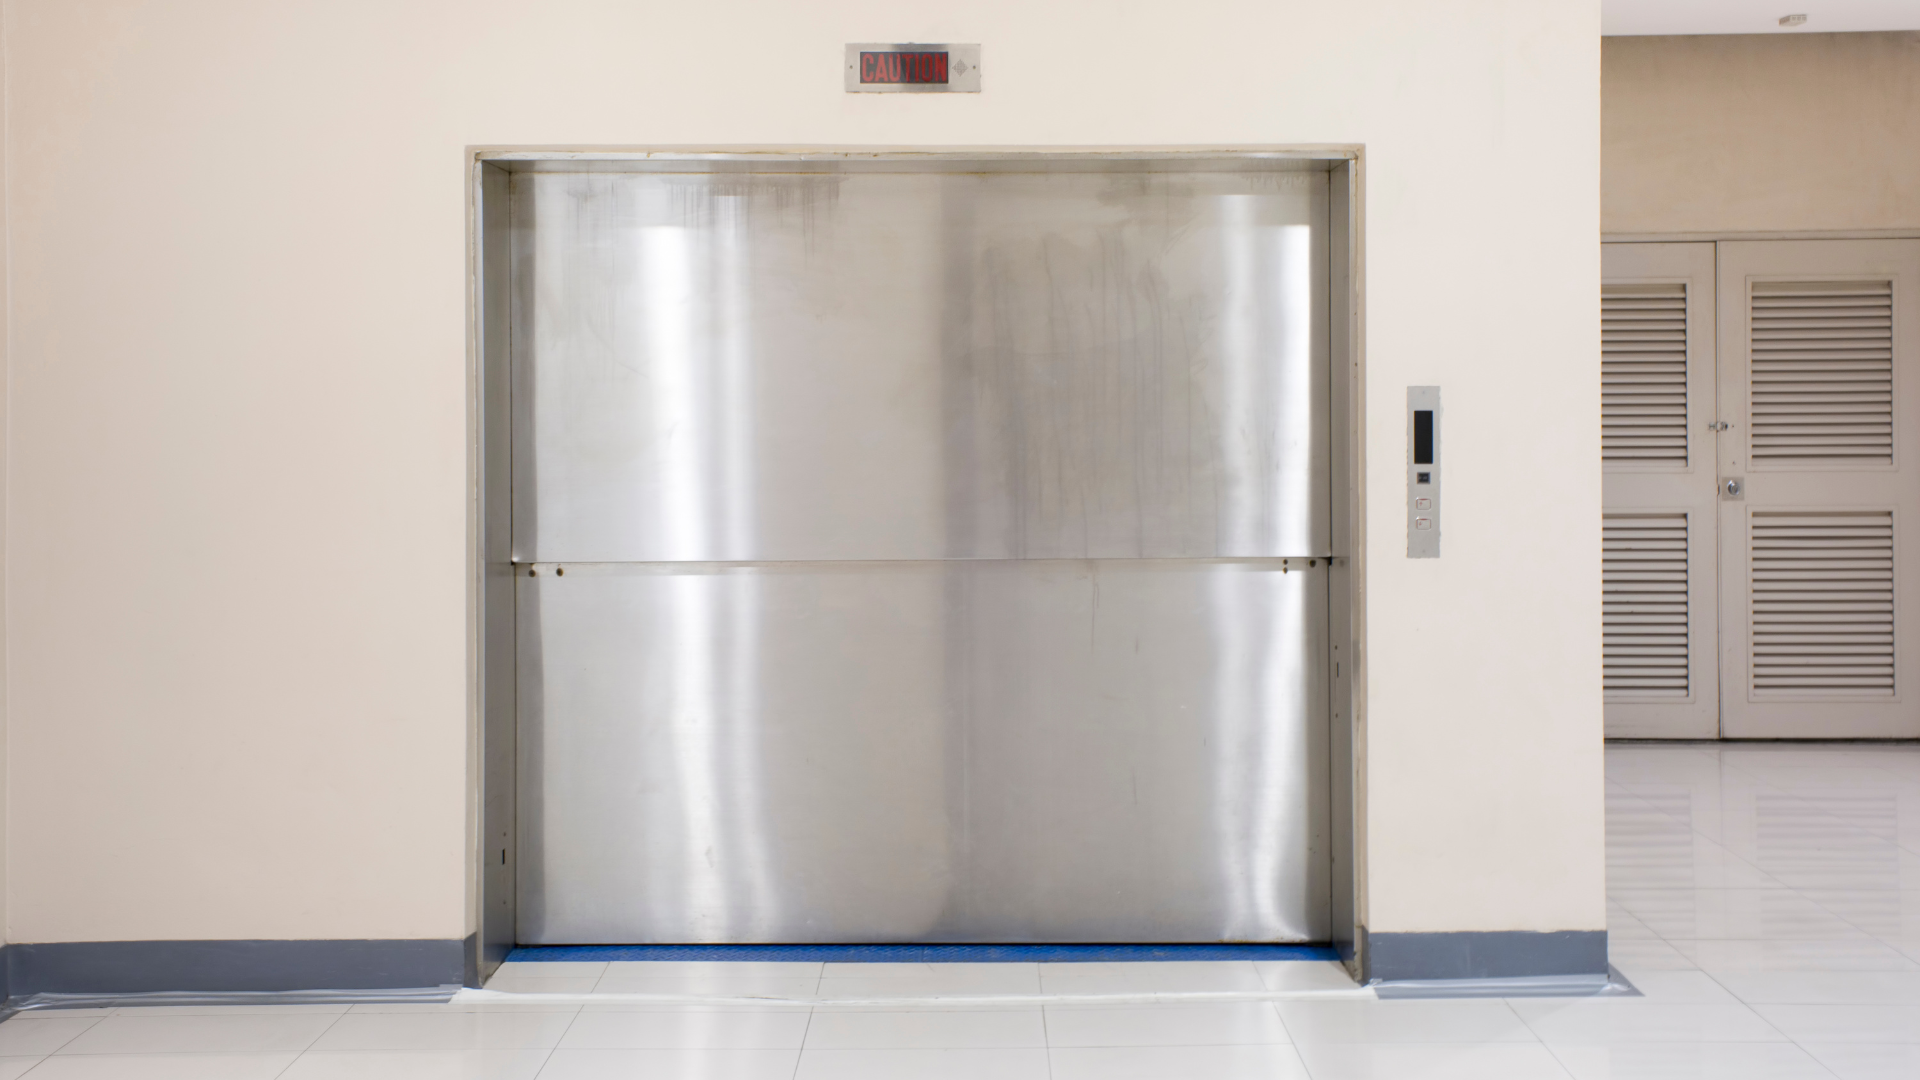 Maintaining a Freight Elevator: What You Need to Know